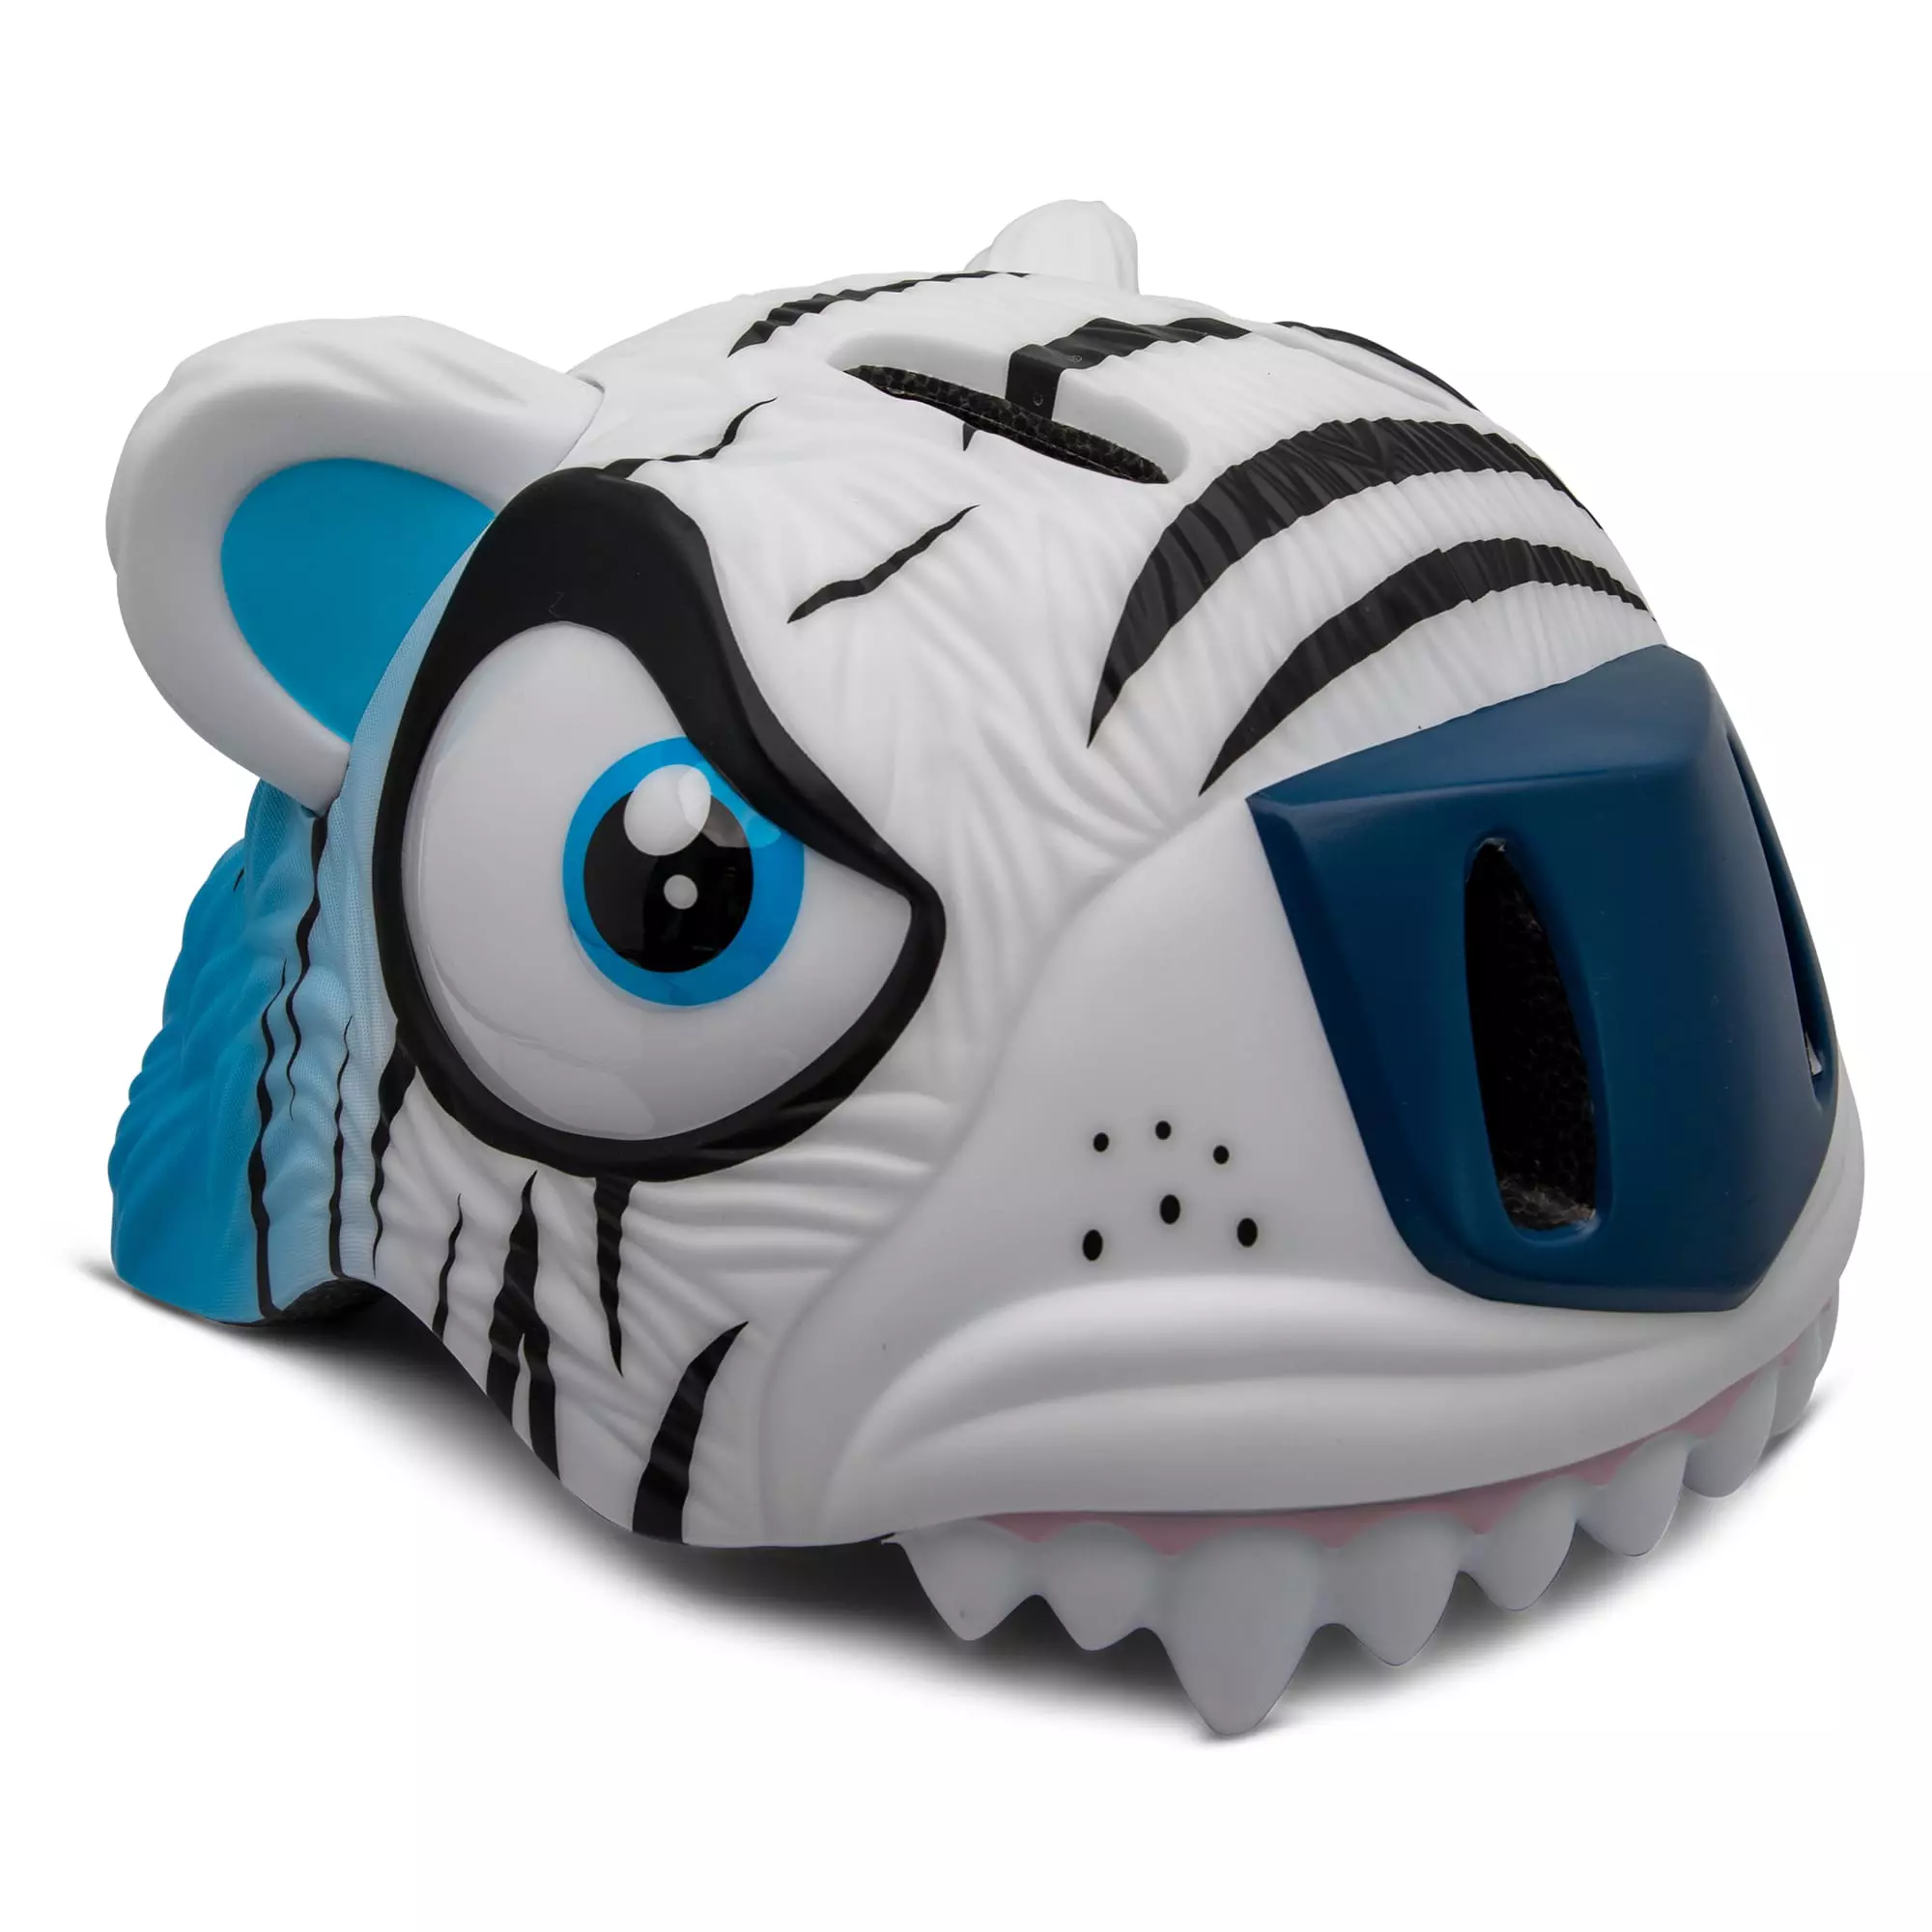 Crazy Safety Tiger Bicycle Helmet White